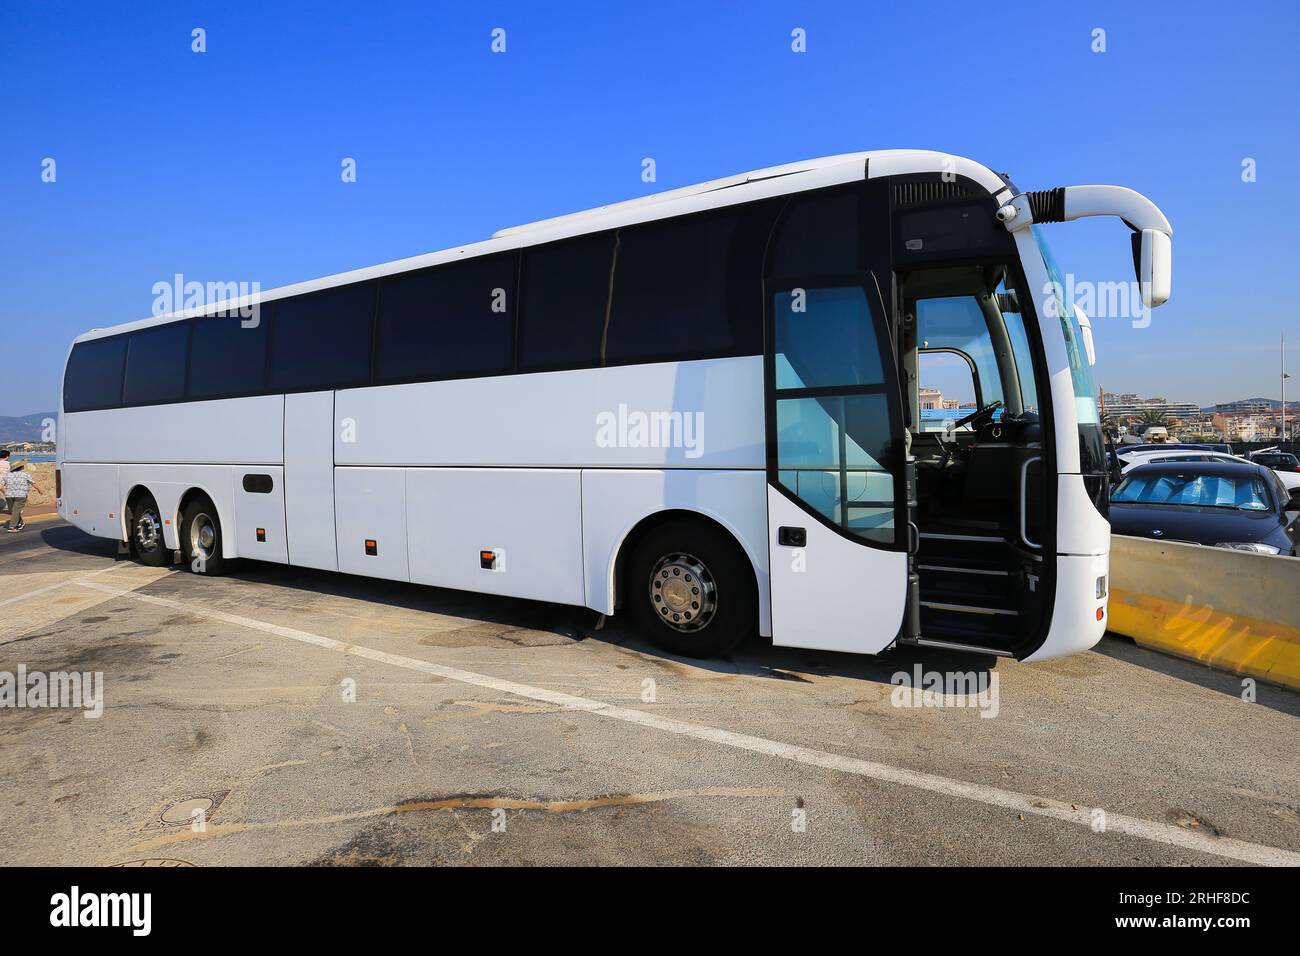 Big white passenger bus in the parking lot Stock Photo